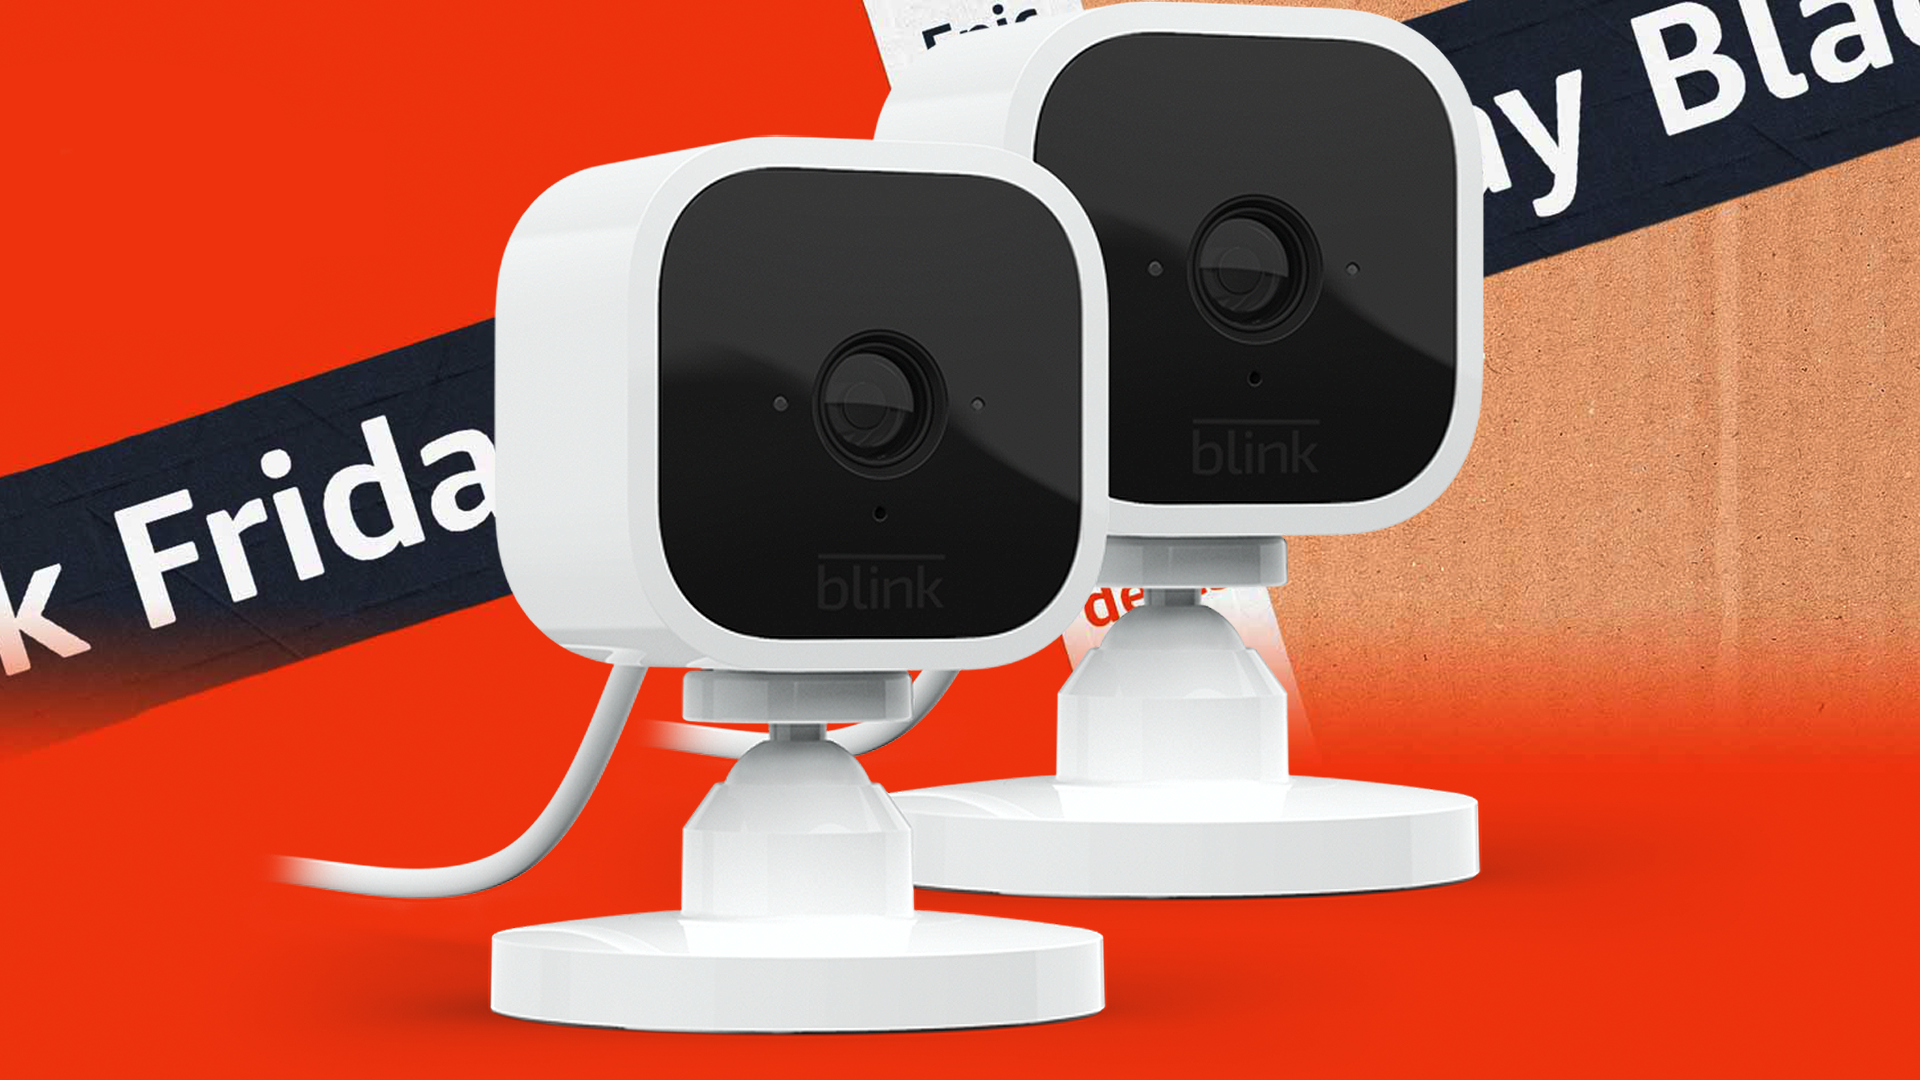 Get Two Blink Smart Security Cameras for the Price of One